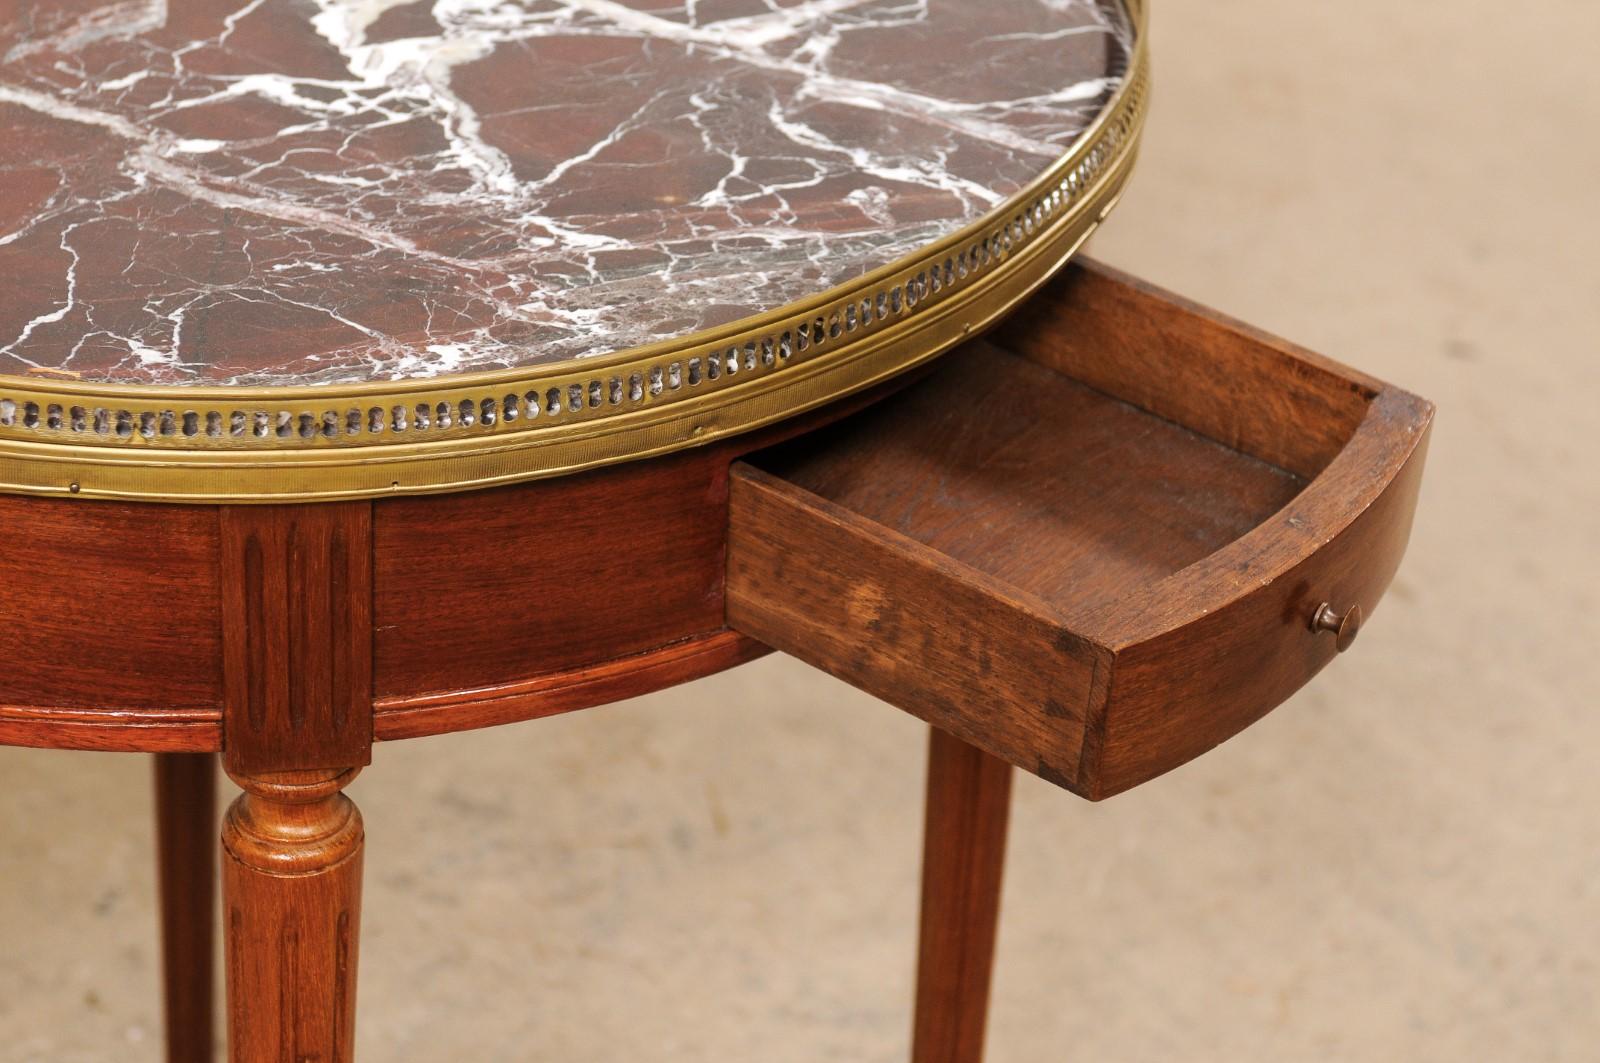 20th Century French Antique Round Cherry Wood Table W/Marble Top & Brass Gallery and Feet For Sale